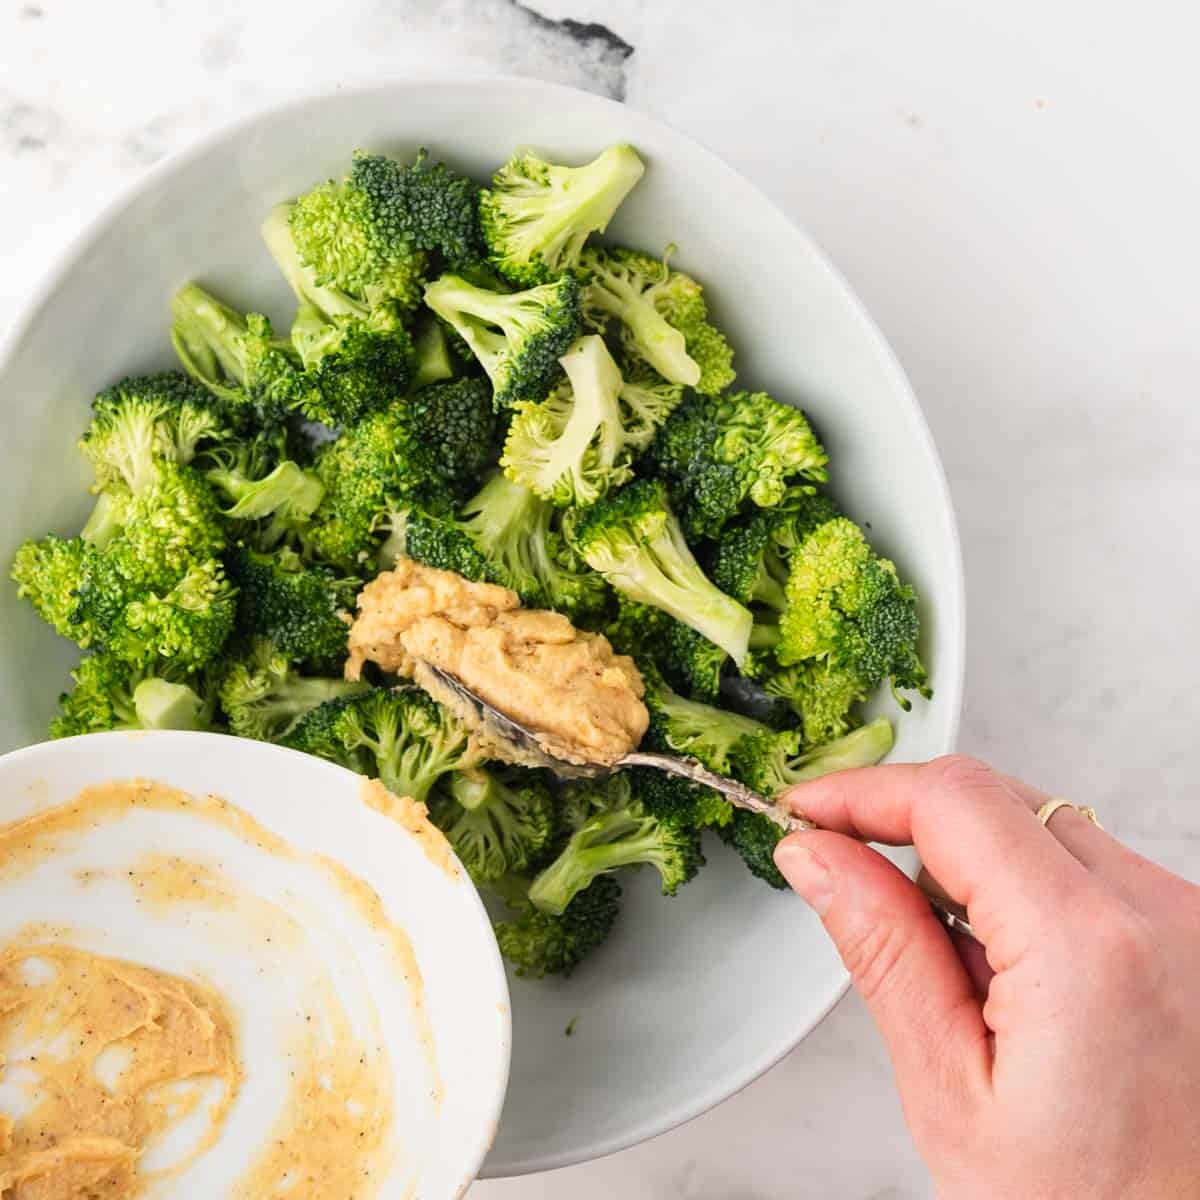 miso butter being spooned onto a bowl of broccoli